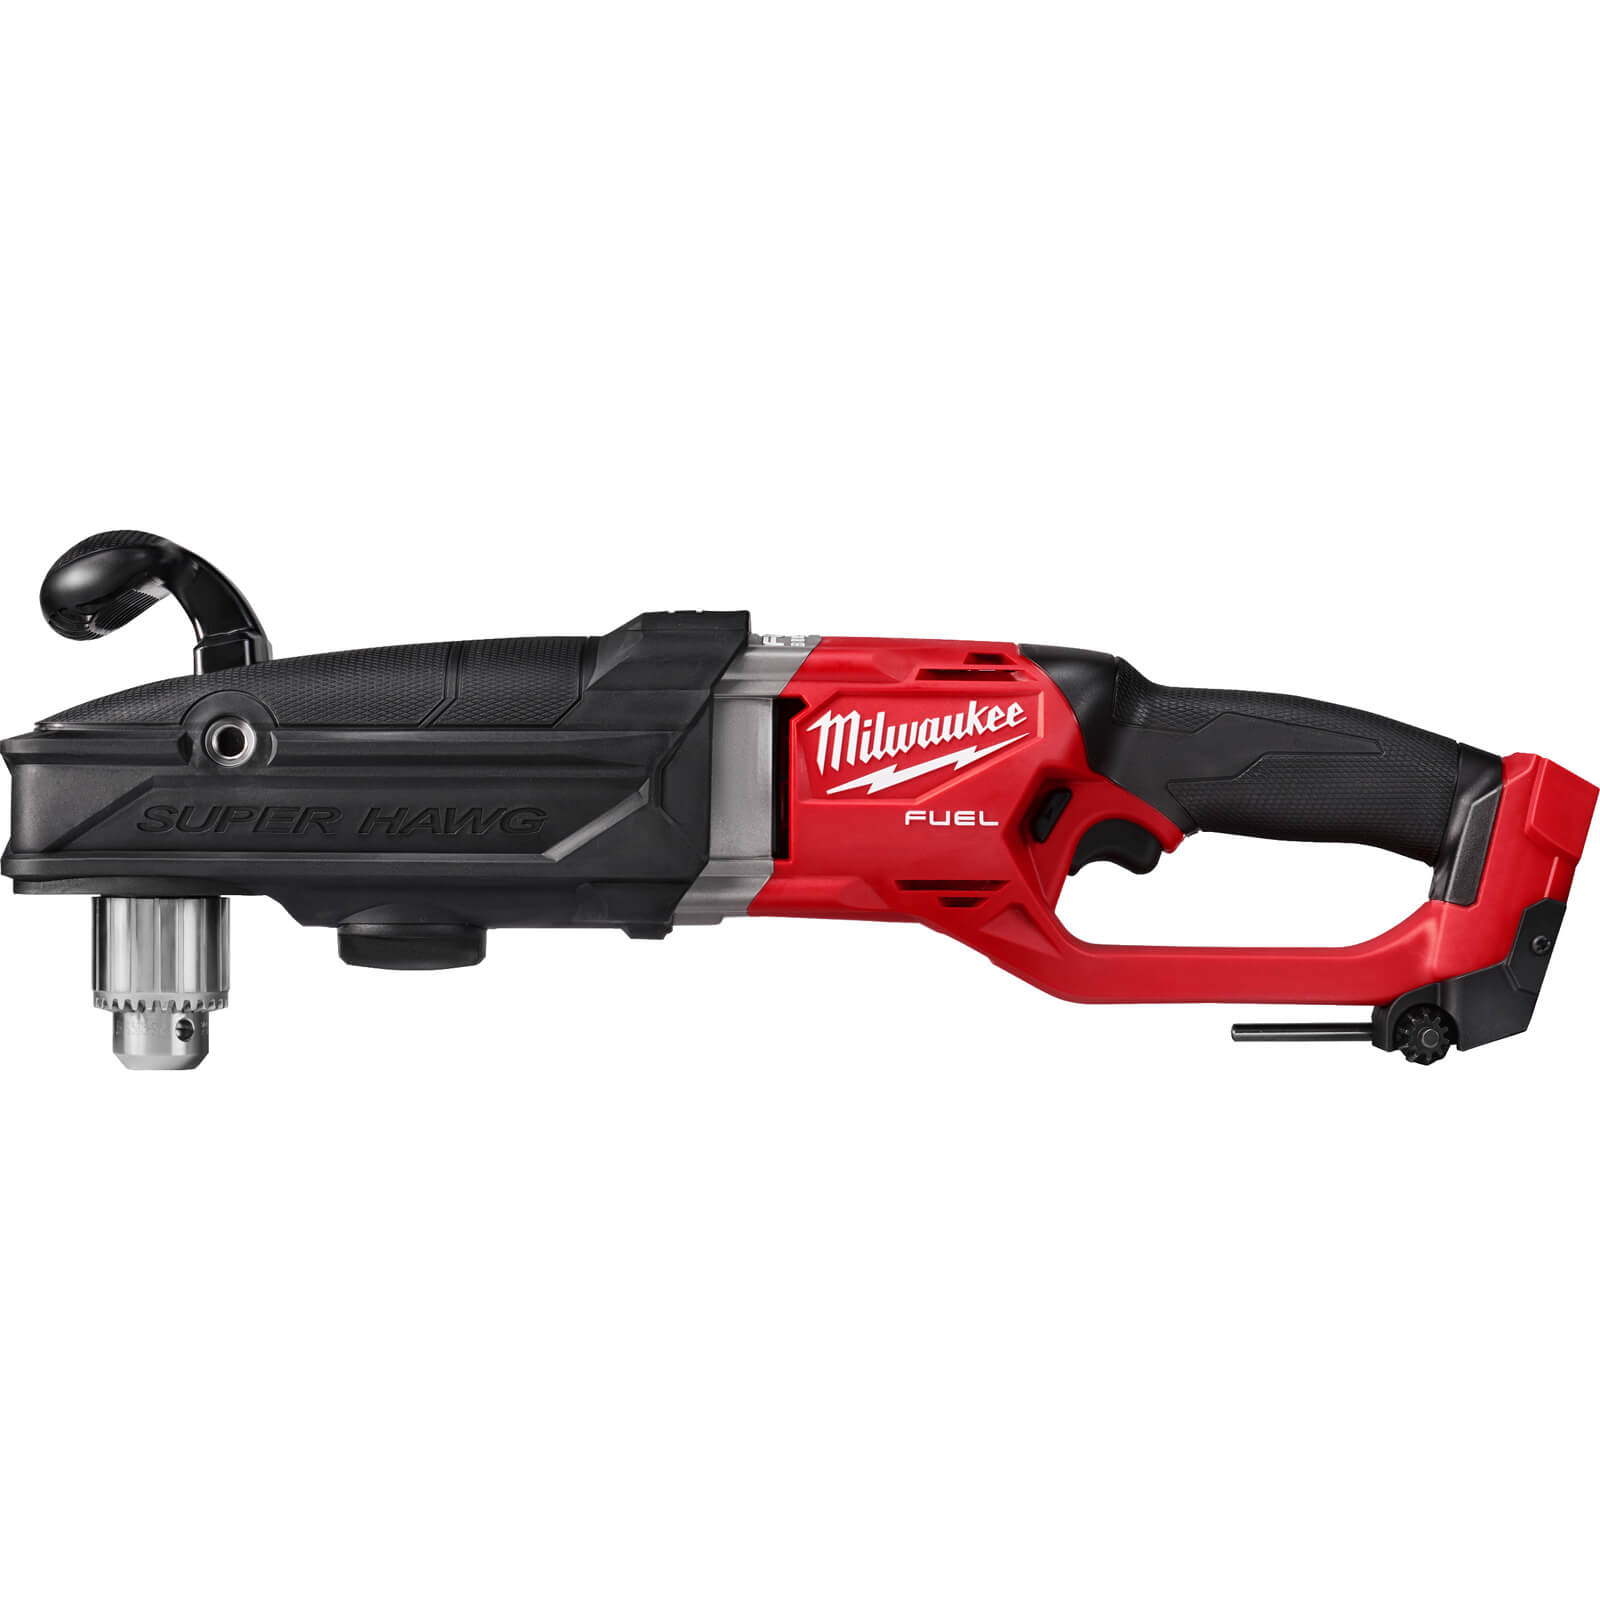 Image of Milwaukee M18 FRAD2 Fuel 18v Cordless Brushless Super Hawg Angle Drill No Batteries No Charger No Case